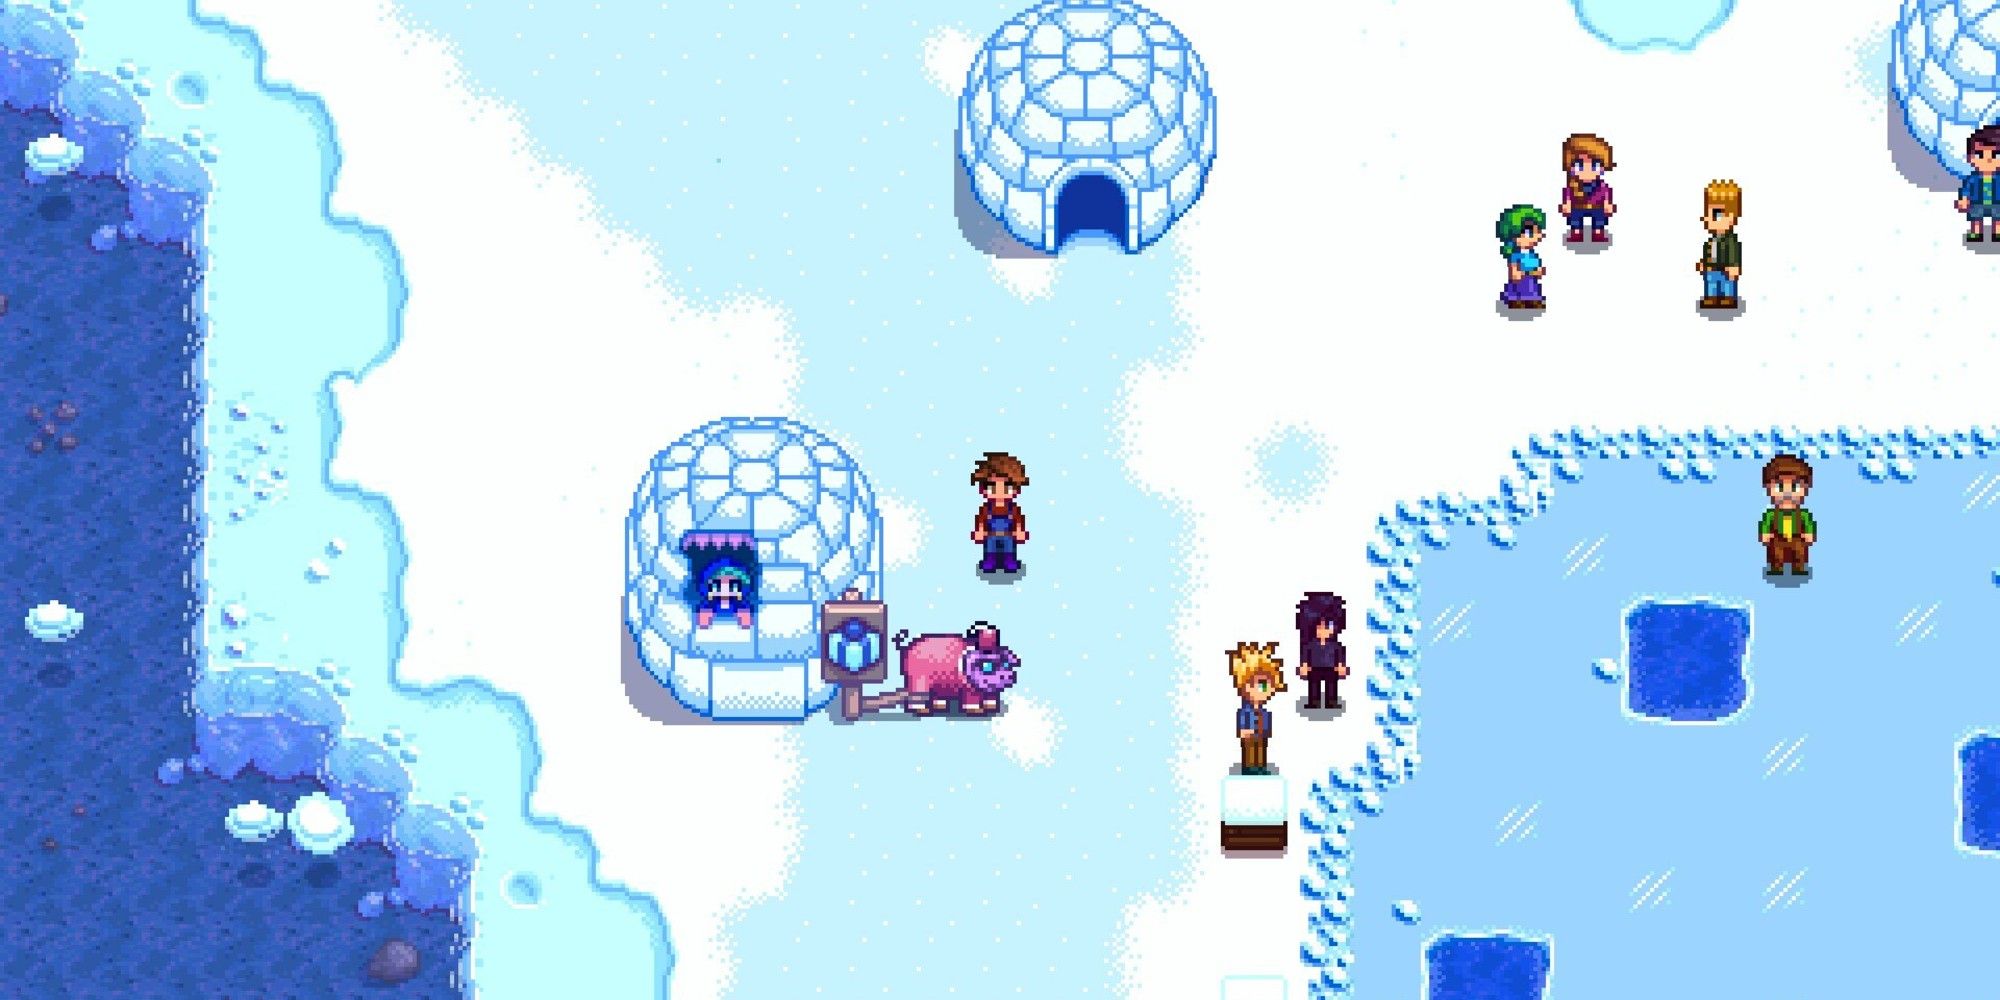 player standing next to traveling merchant at the festival of ice